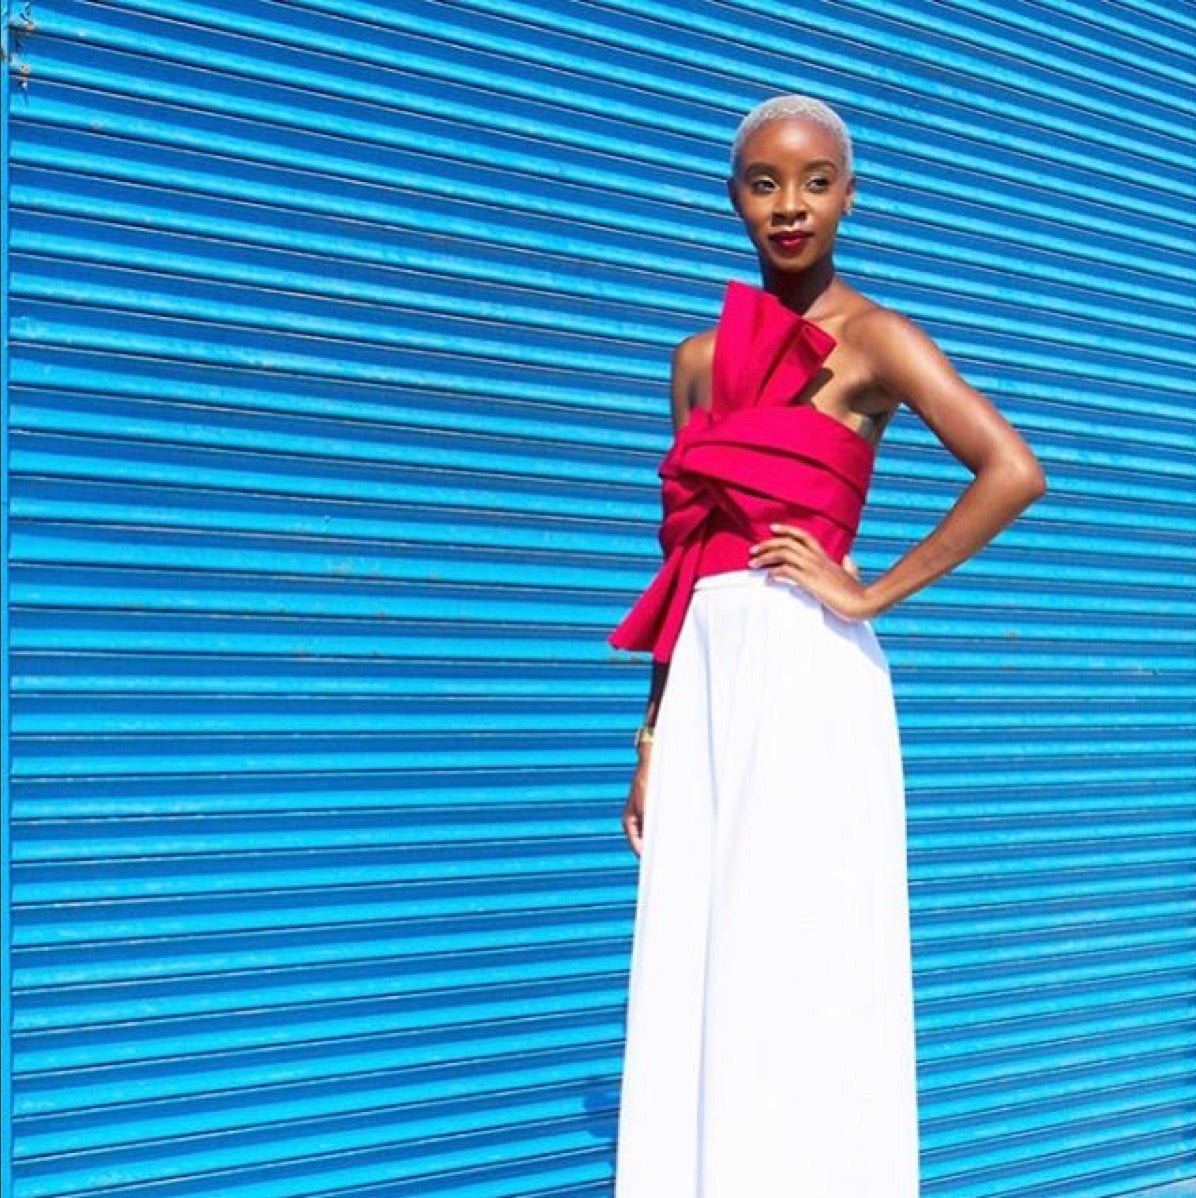 The Social Influencers That Ruled the Style Scene in 2015